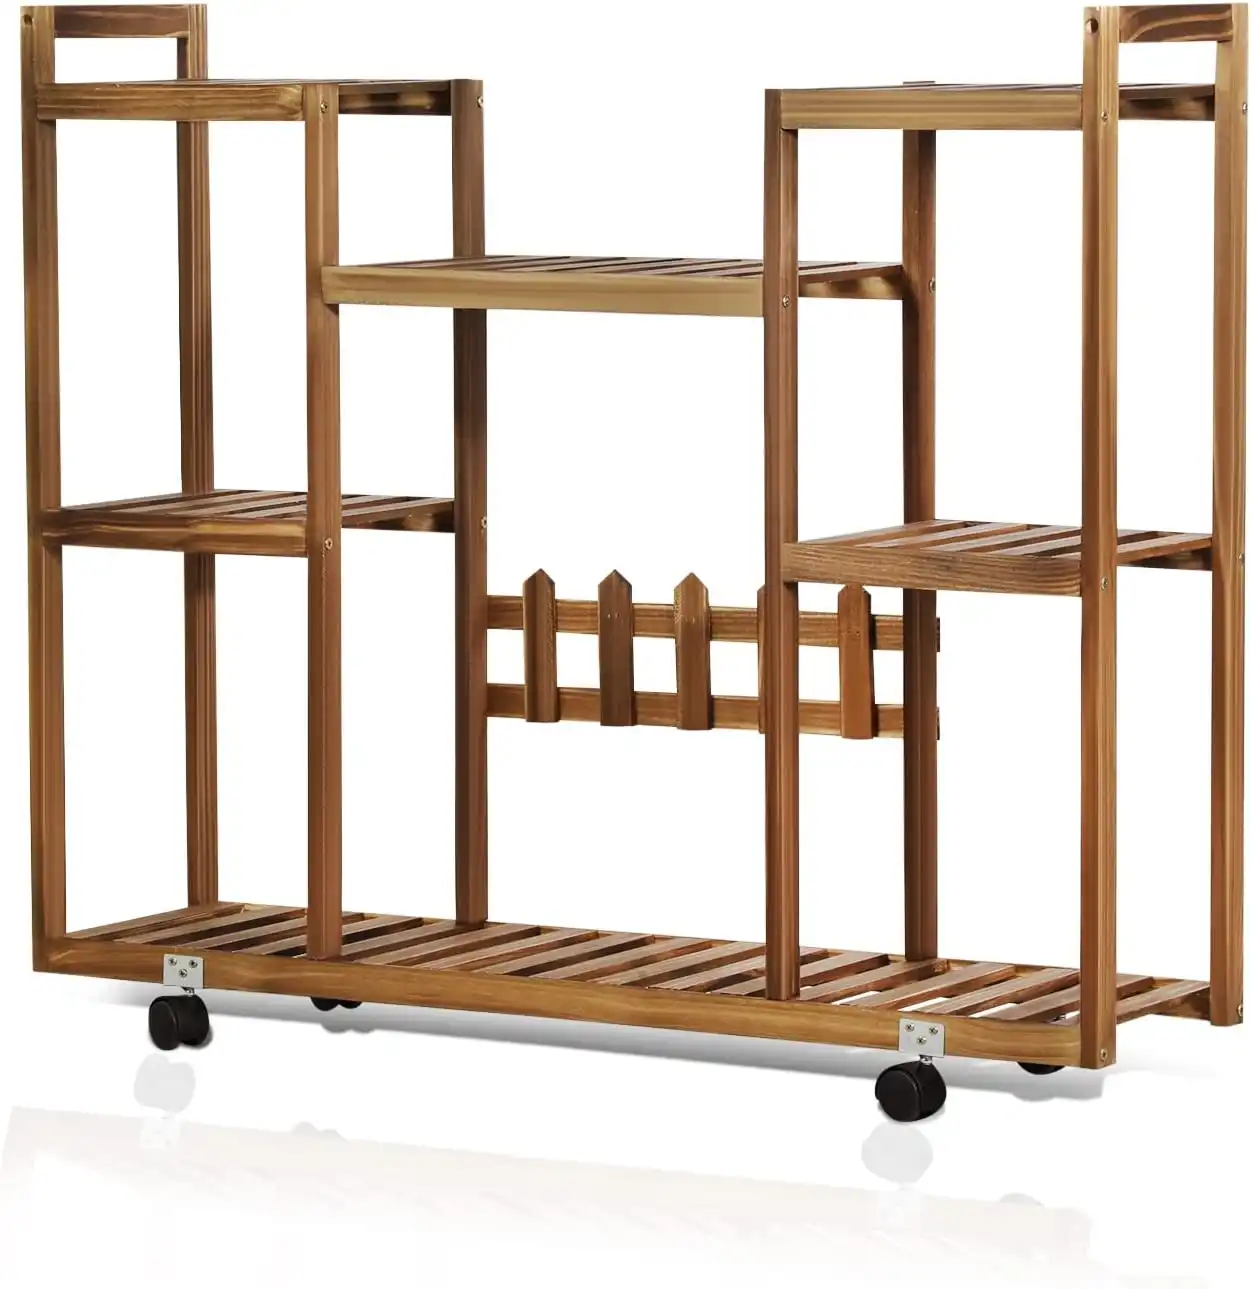 Multi-Tier Wood Plant Stand Shelf - Brown